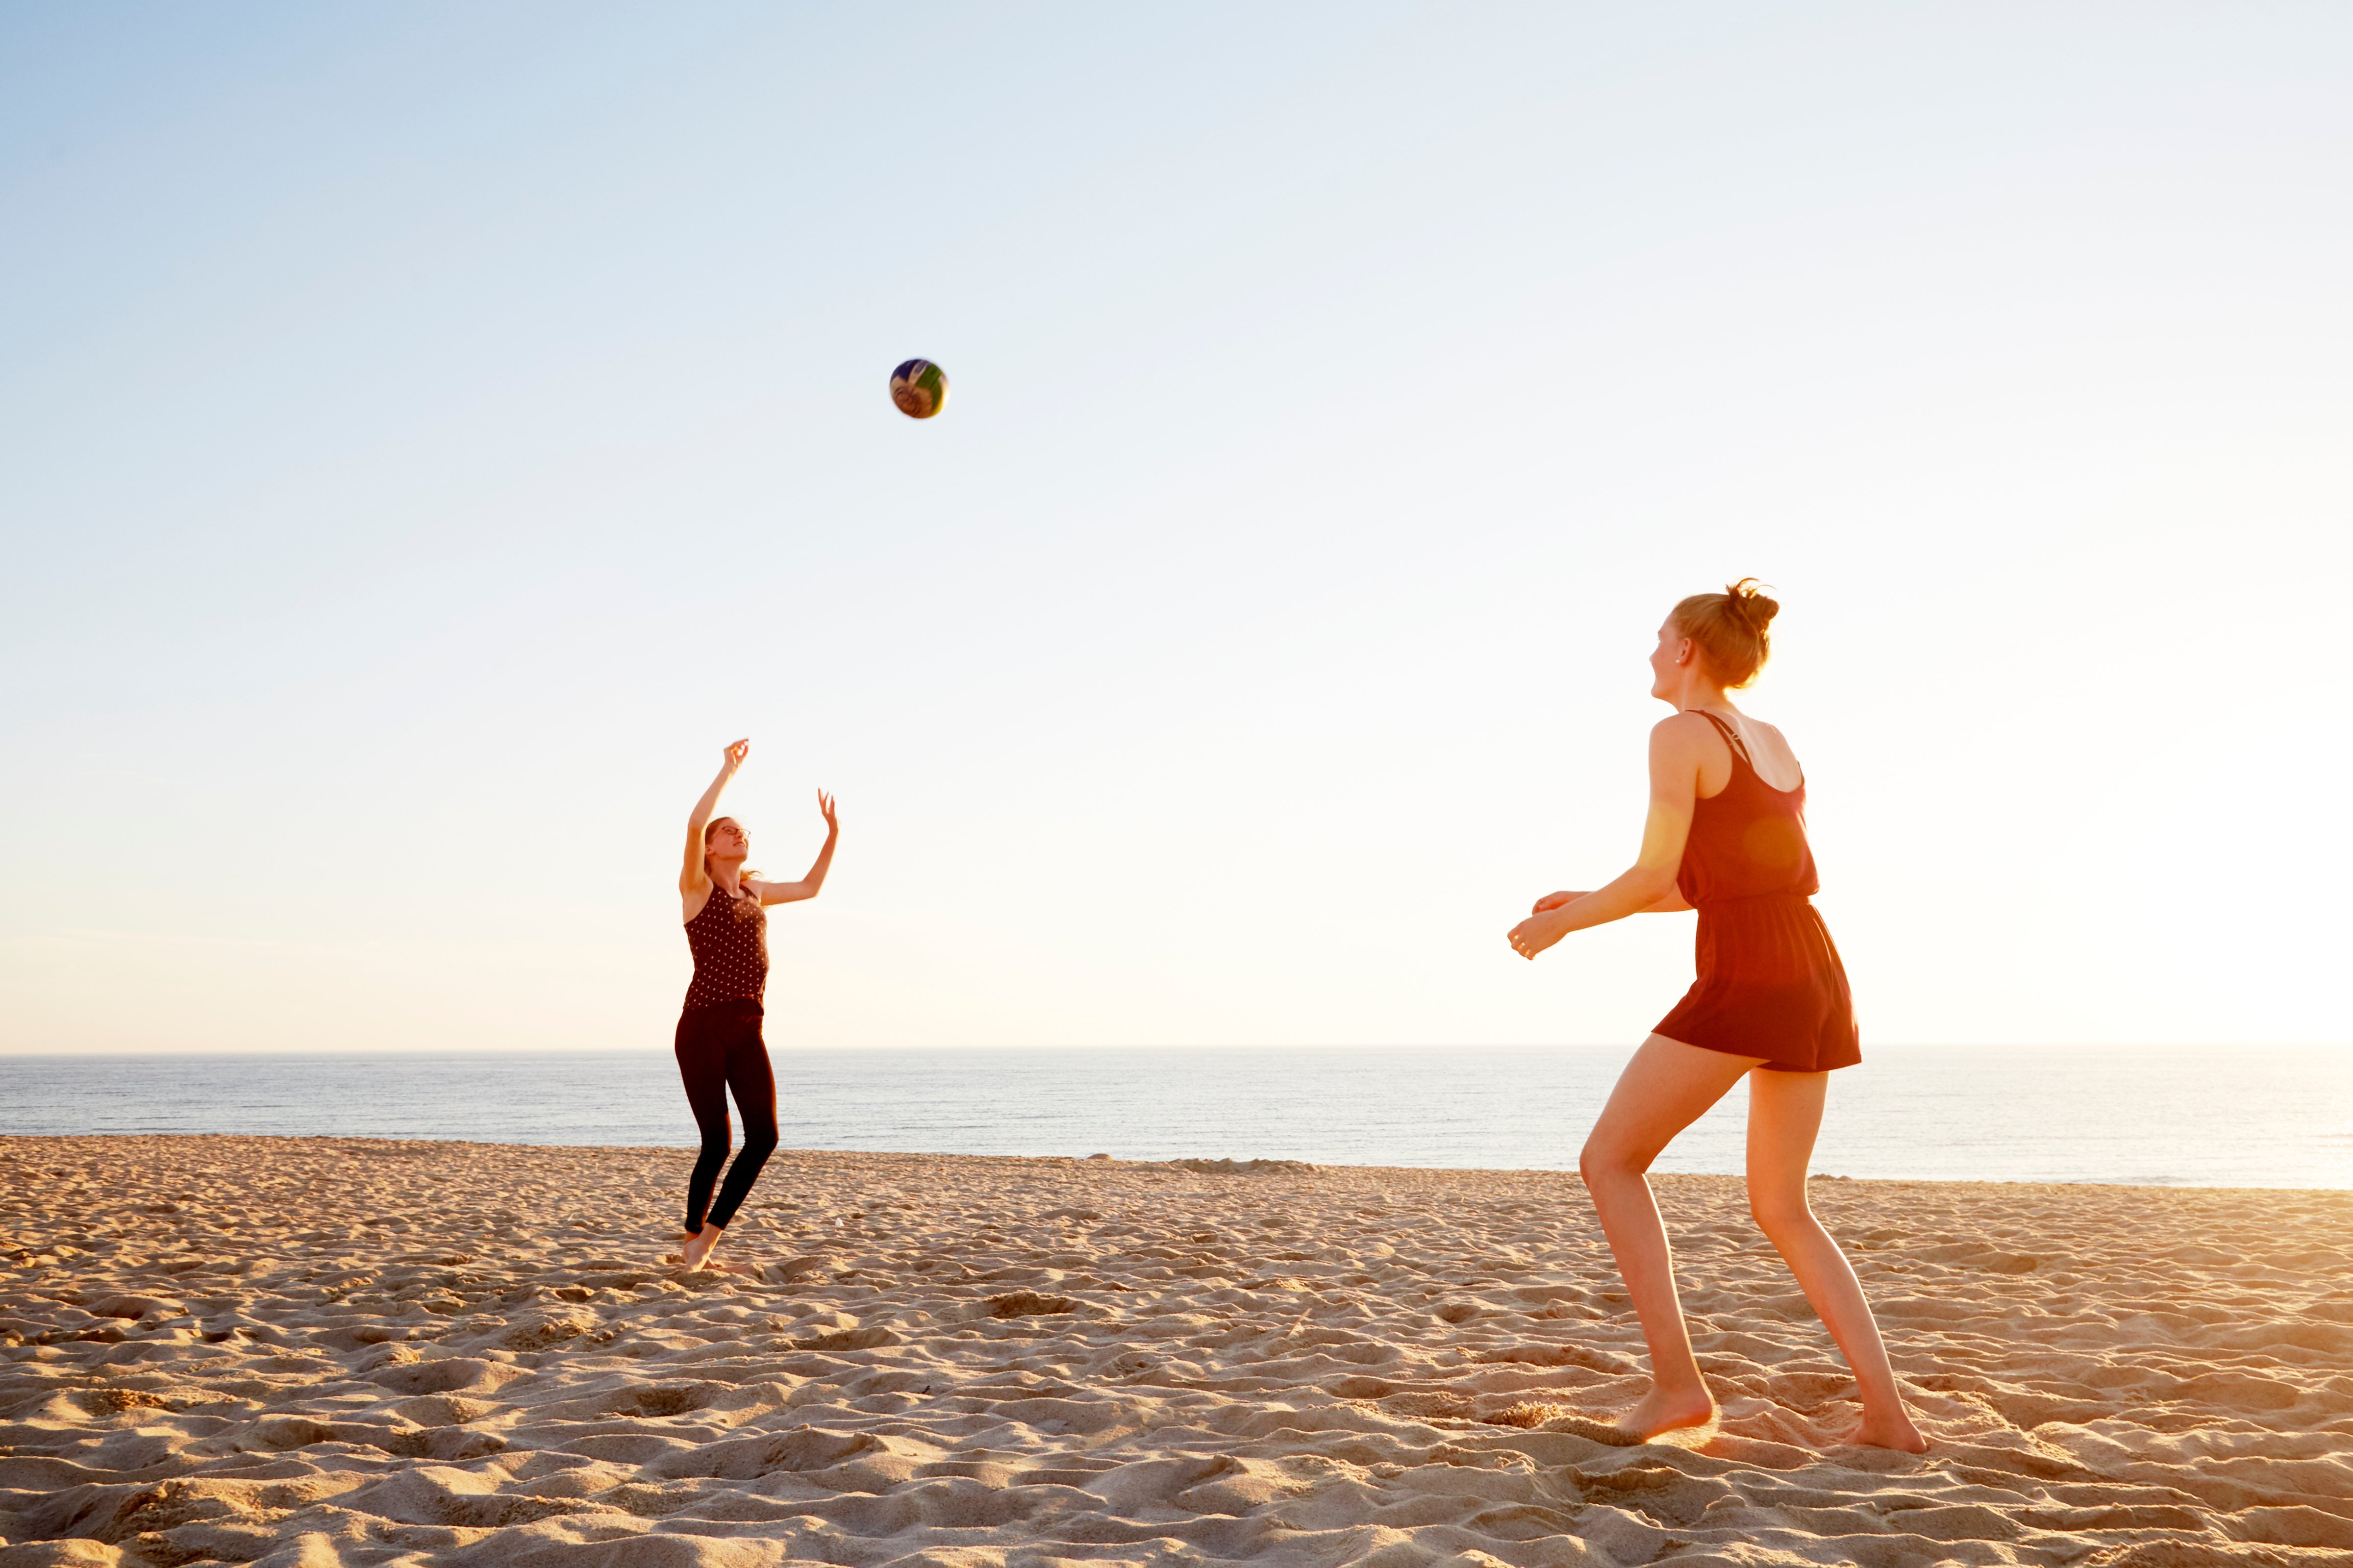 Women playing volleyball at the beach